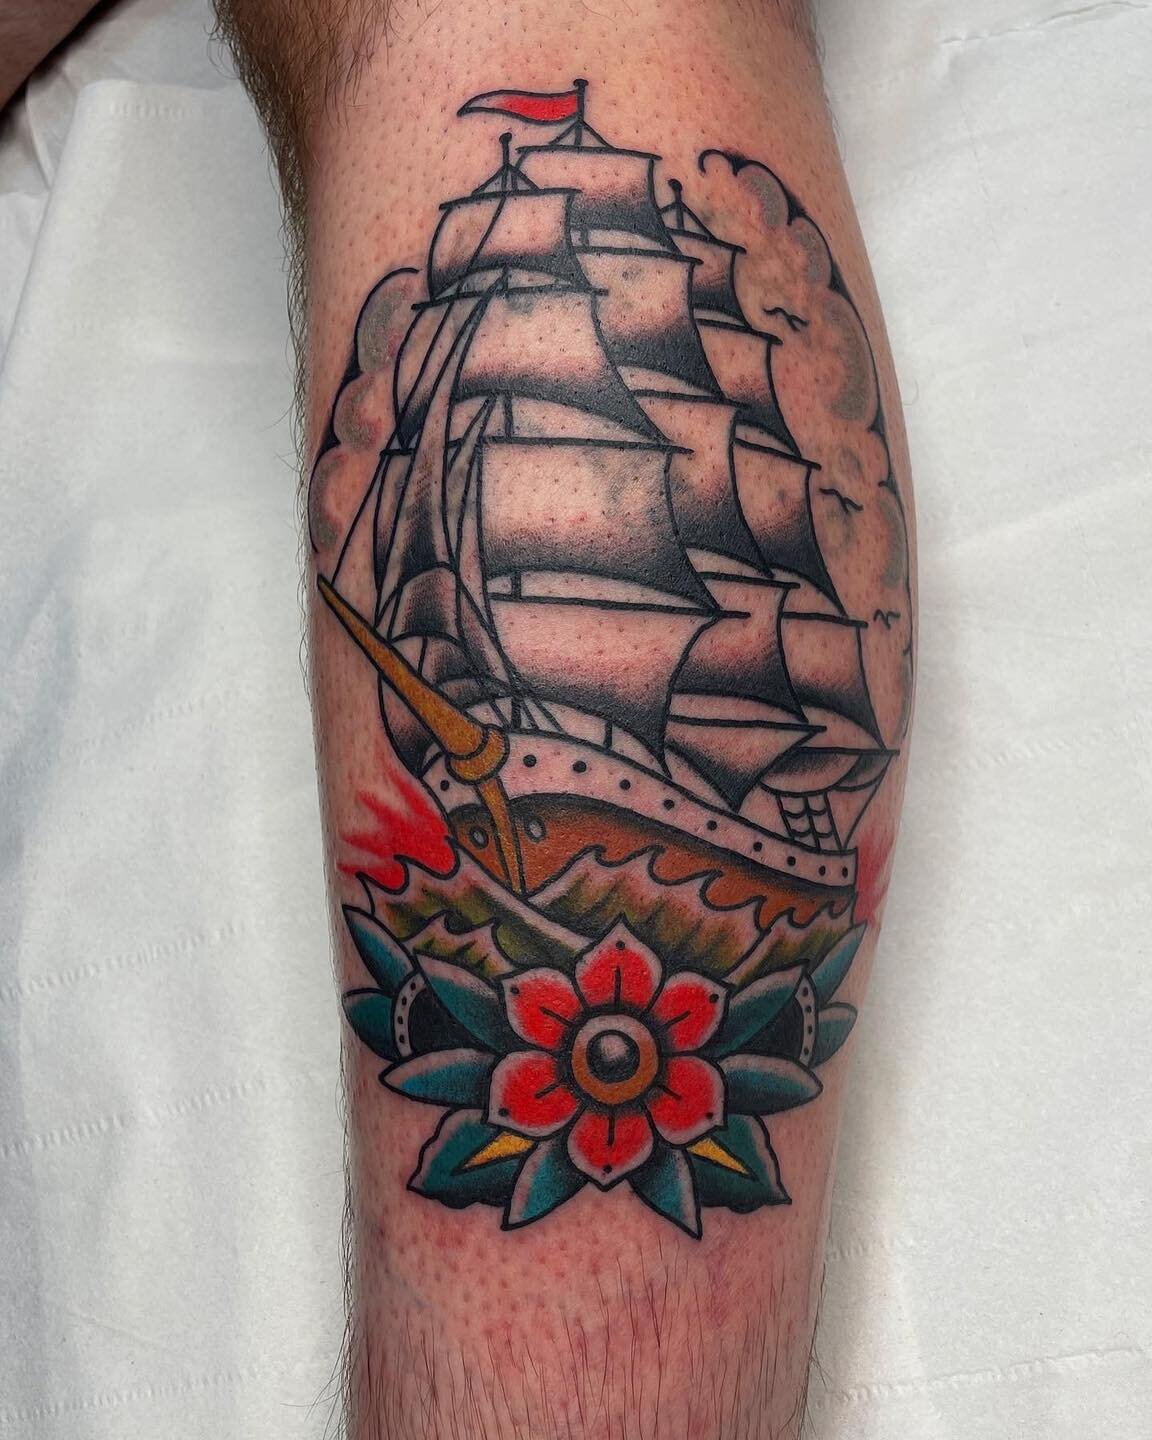 Traditional clipper ship by @kylecartlidgetattoo 
.
.
.
.
.
.
.
.
.

#tattoo #traditionaltattoo #radtrad #tradworkers #colourtattoo #linework #uktattoo #uktattooartists #stokeontrent #cheshire #newcastleunderlyme #staffordshire #clippership #nahitcal